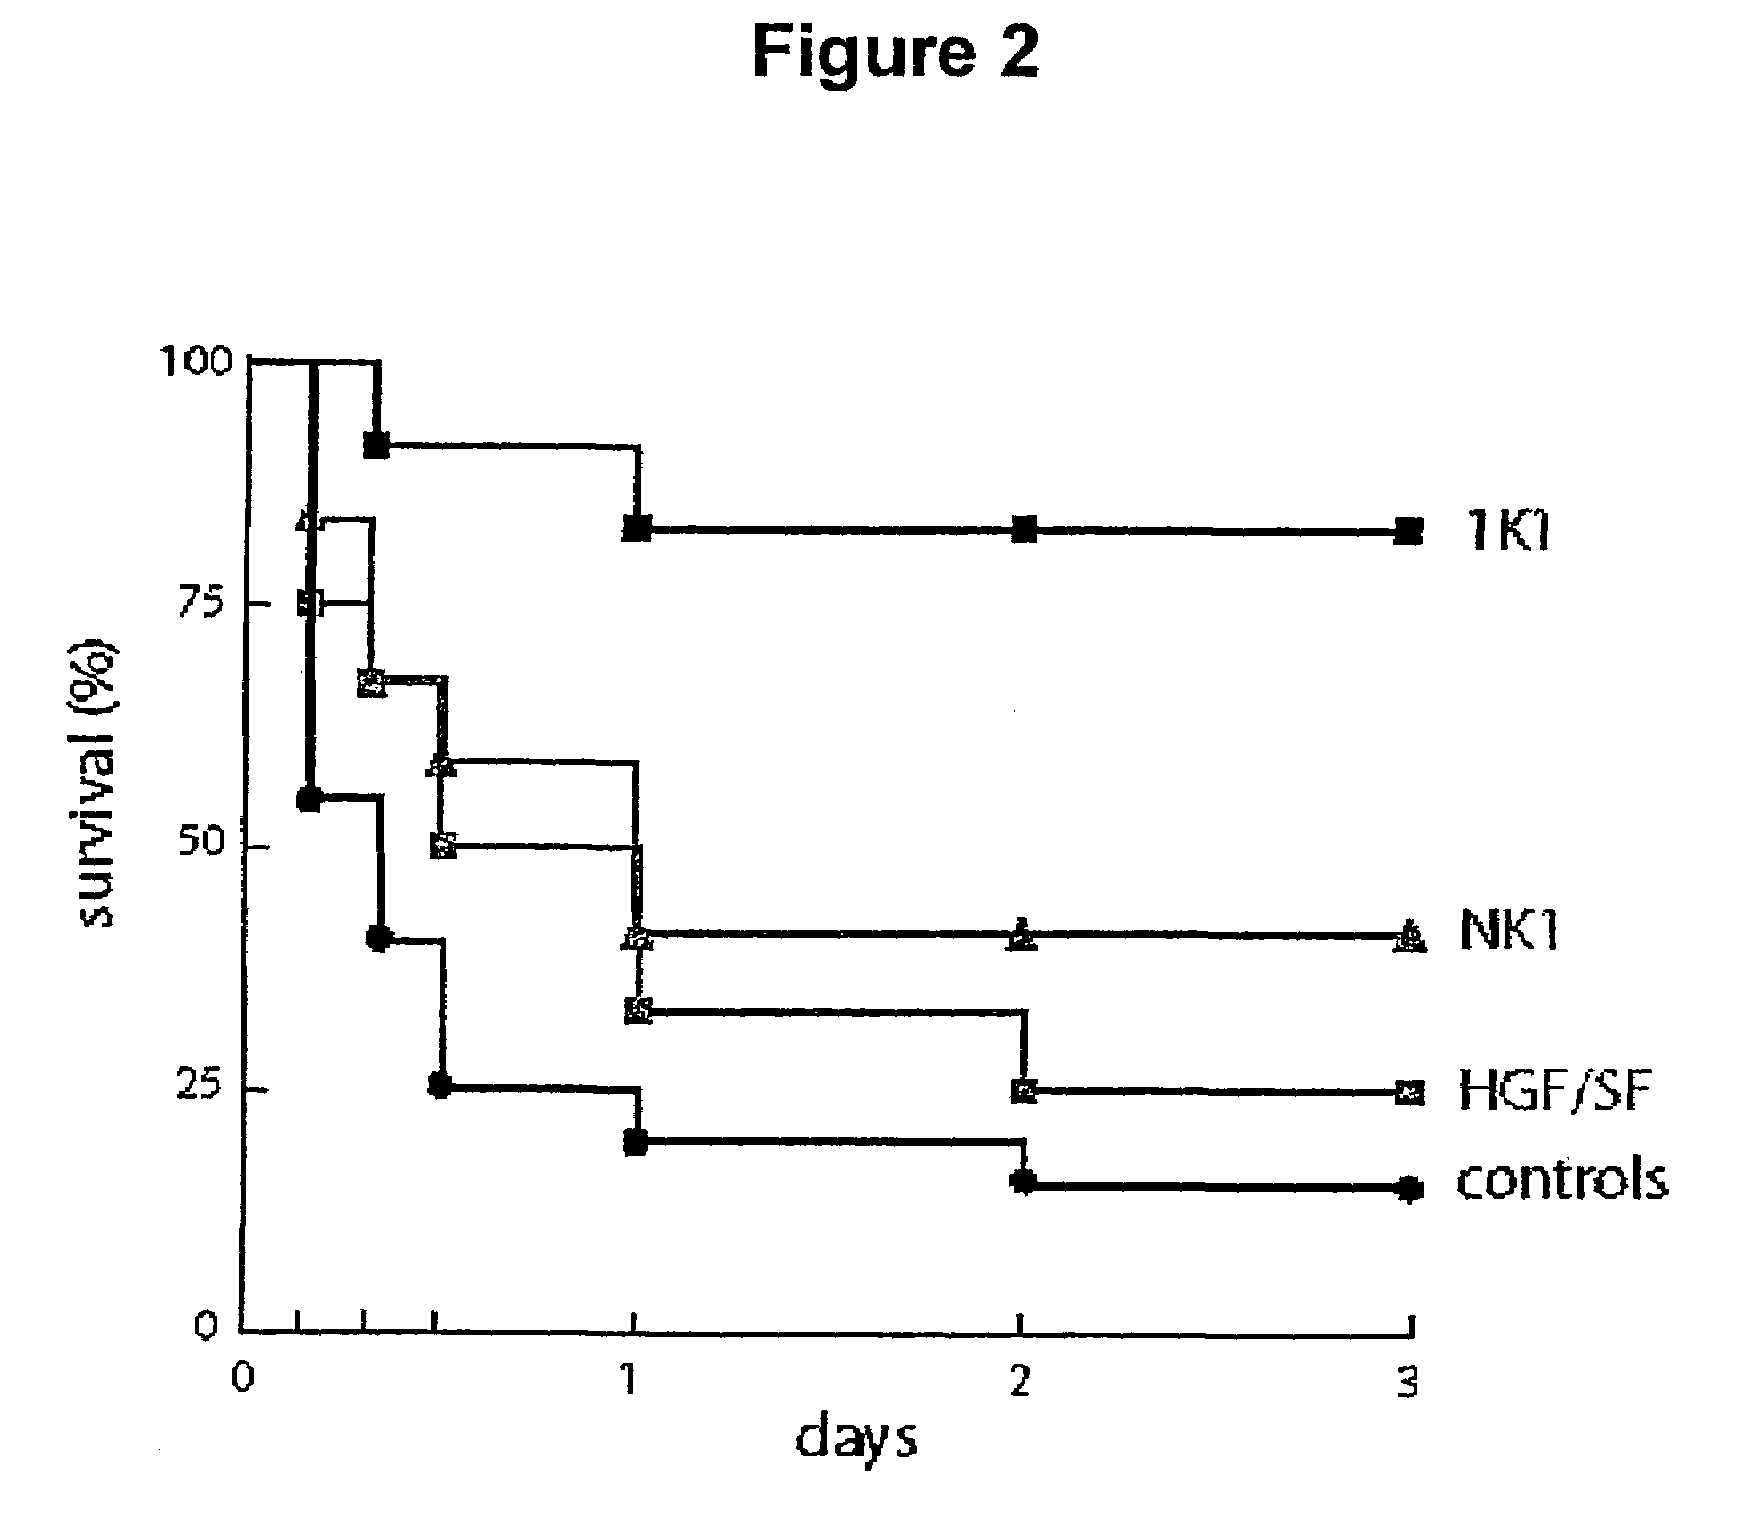 Variants of the NK1 fragment of hepatocyte growth factor/scatter factor (HGF/SF) and their use